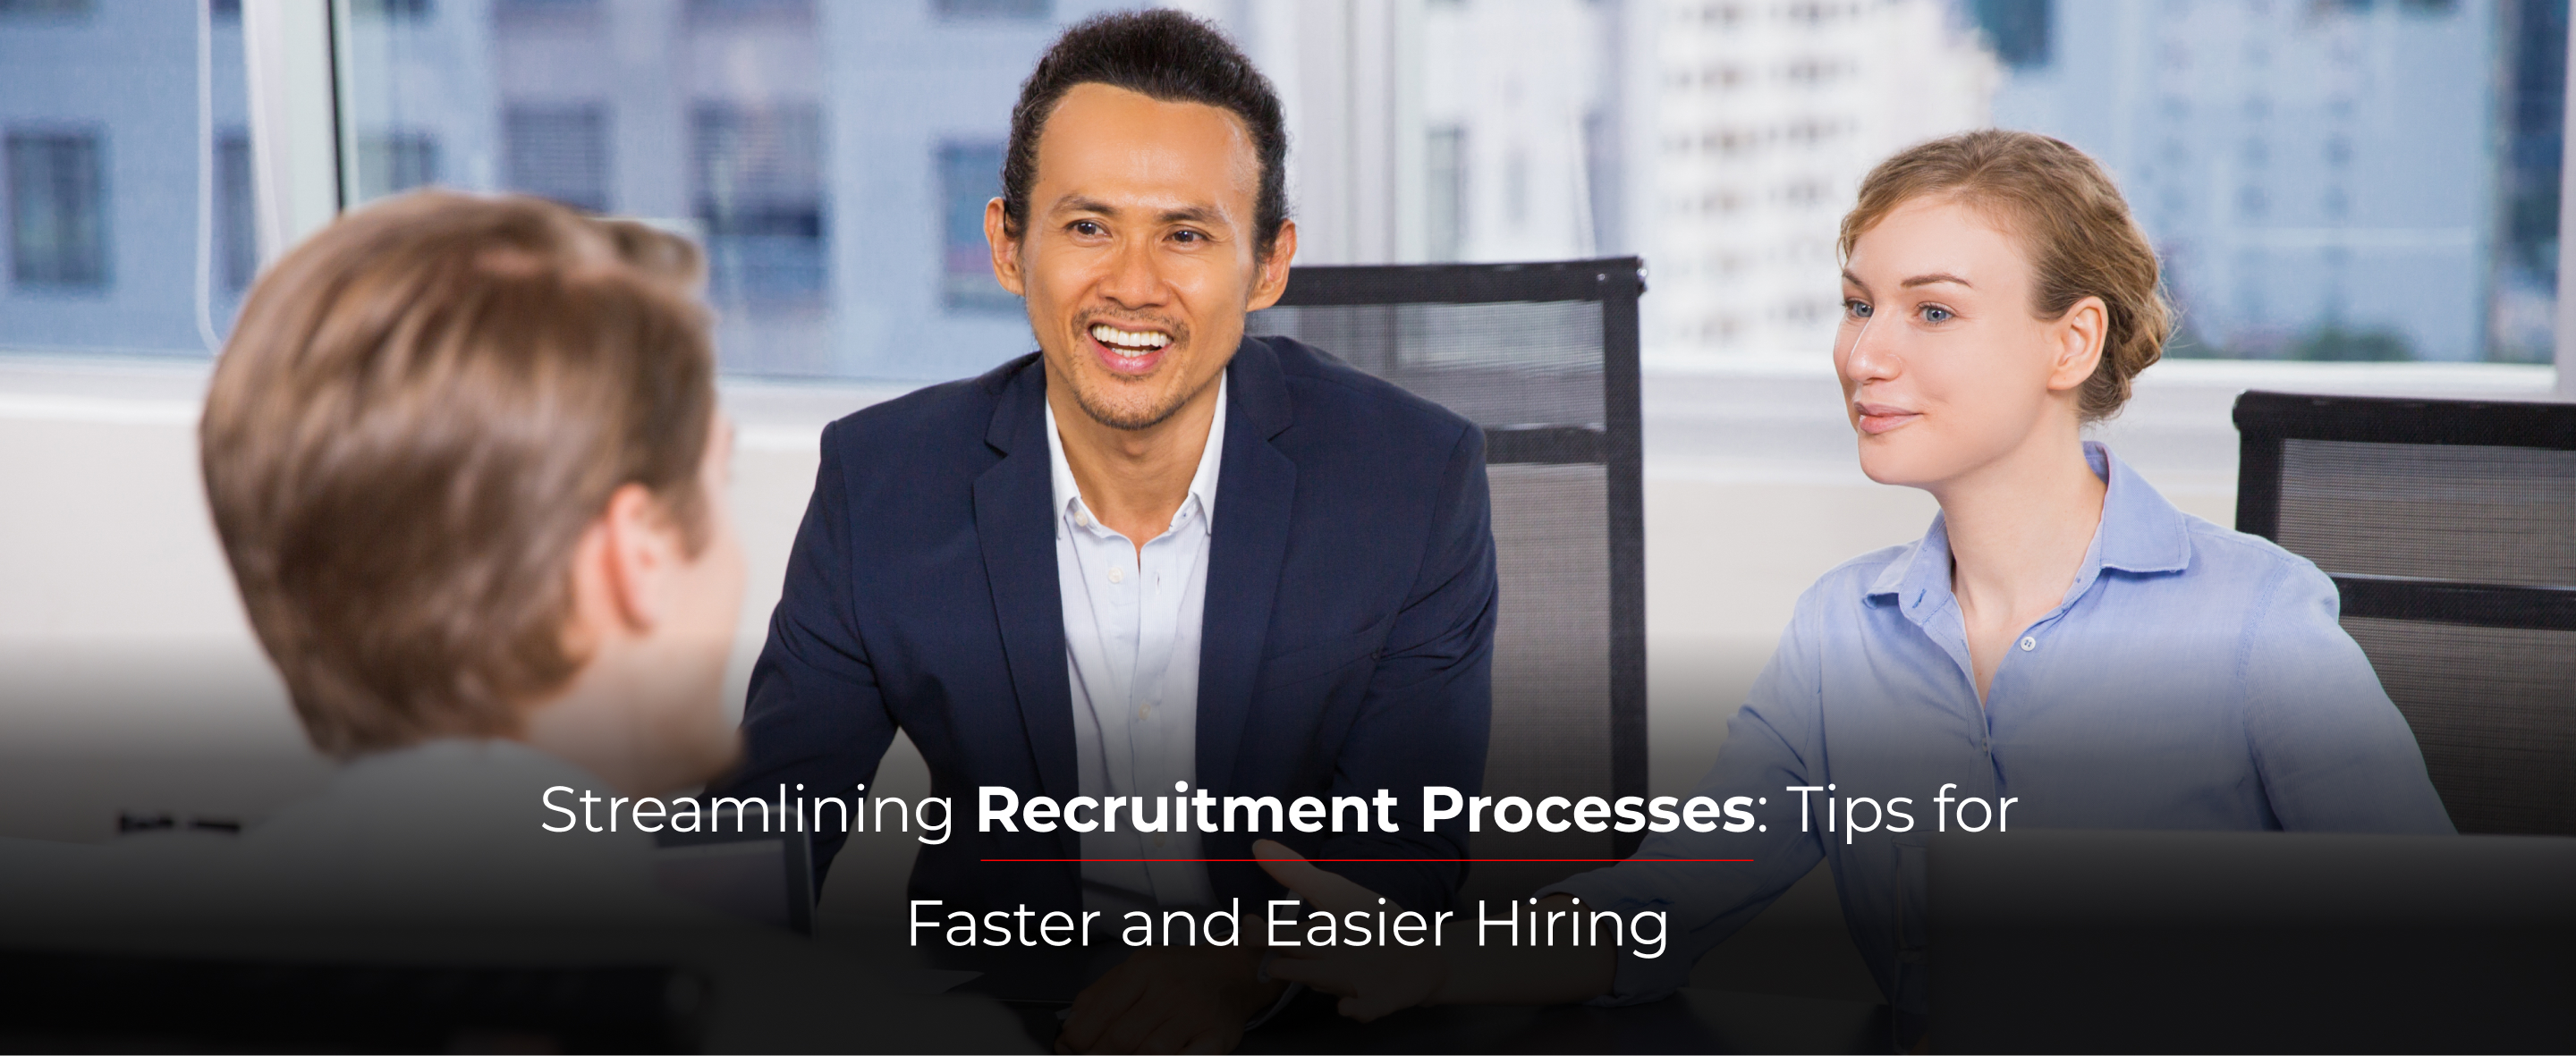 Streamlining Recruitment Processes: Tips for Faster and Easier Hiring